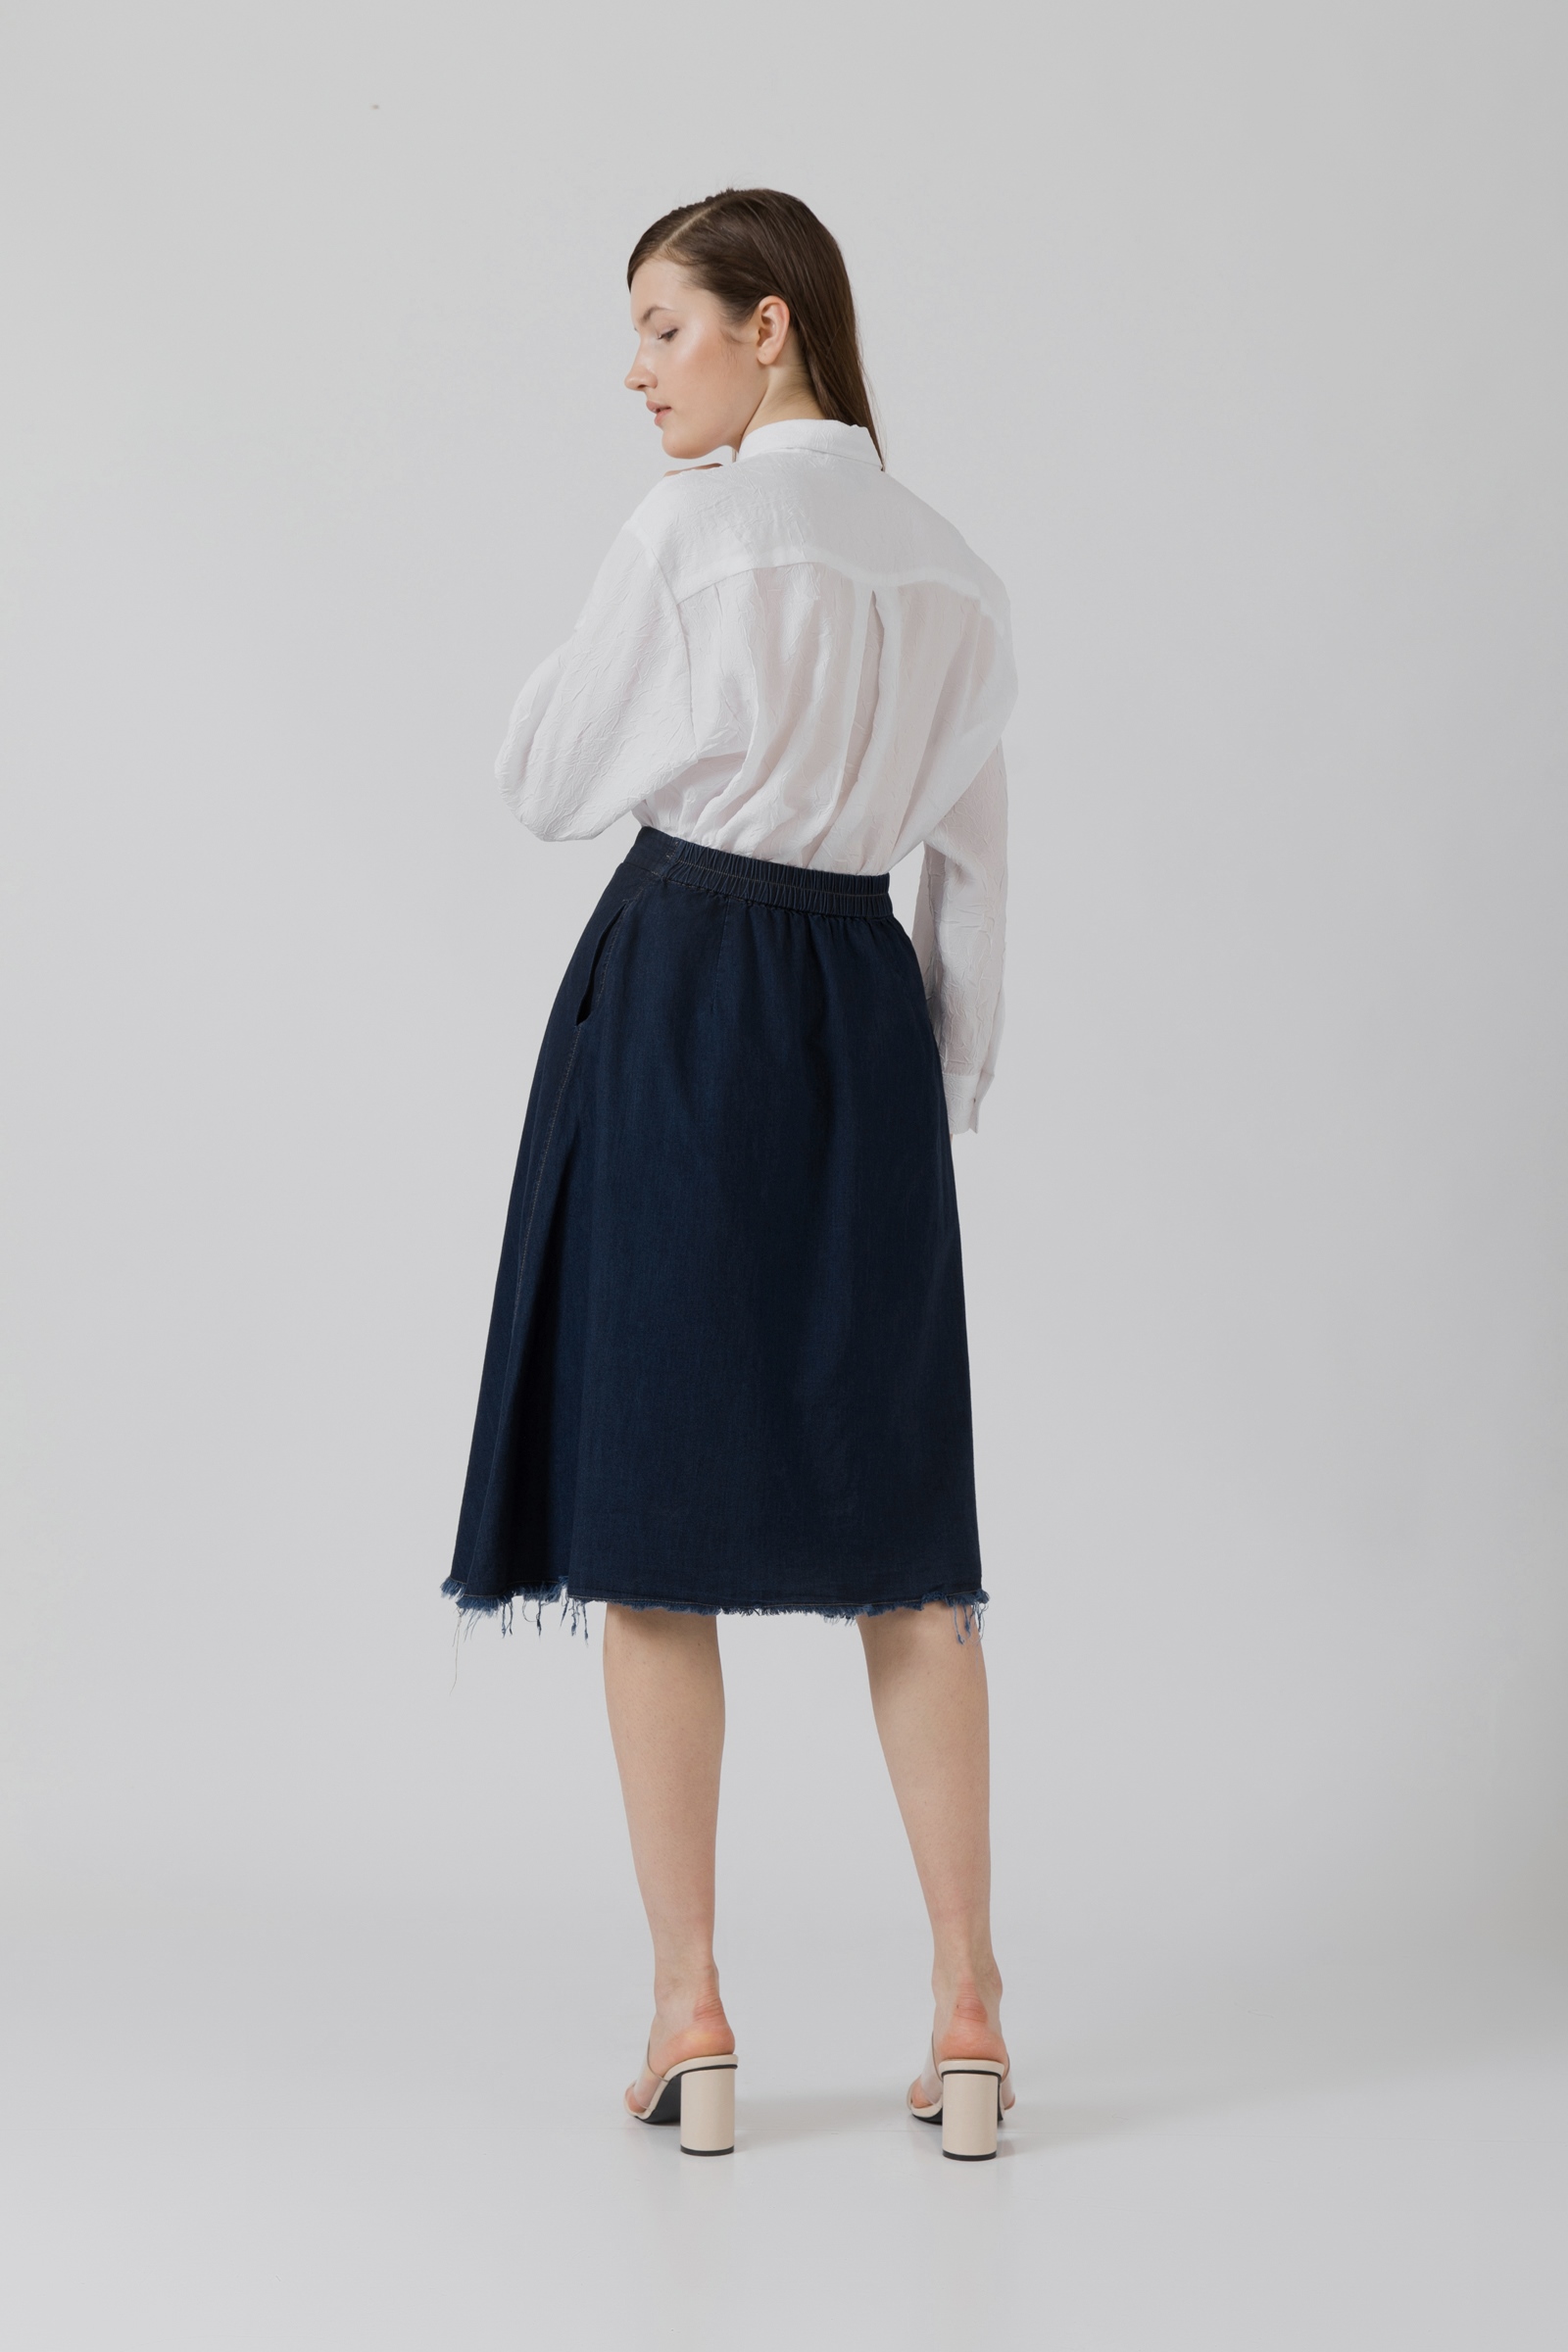 Picture of Artemia Jeans Skirt